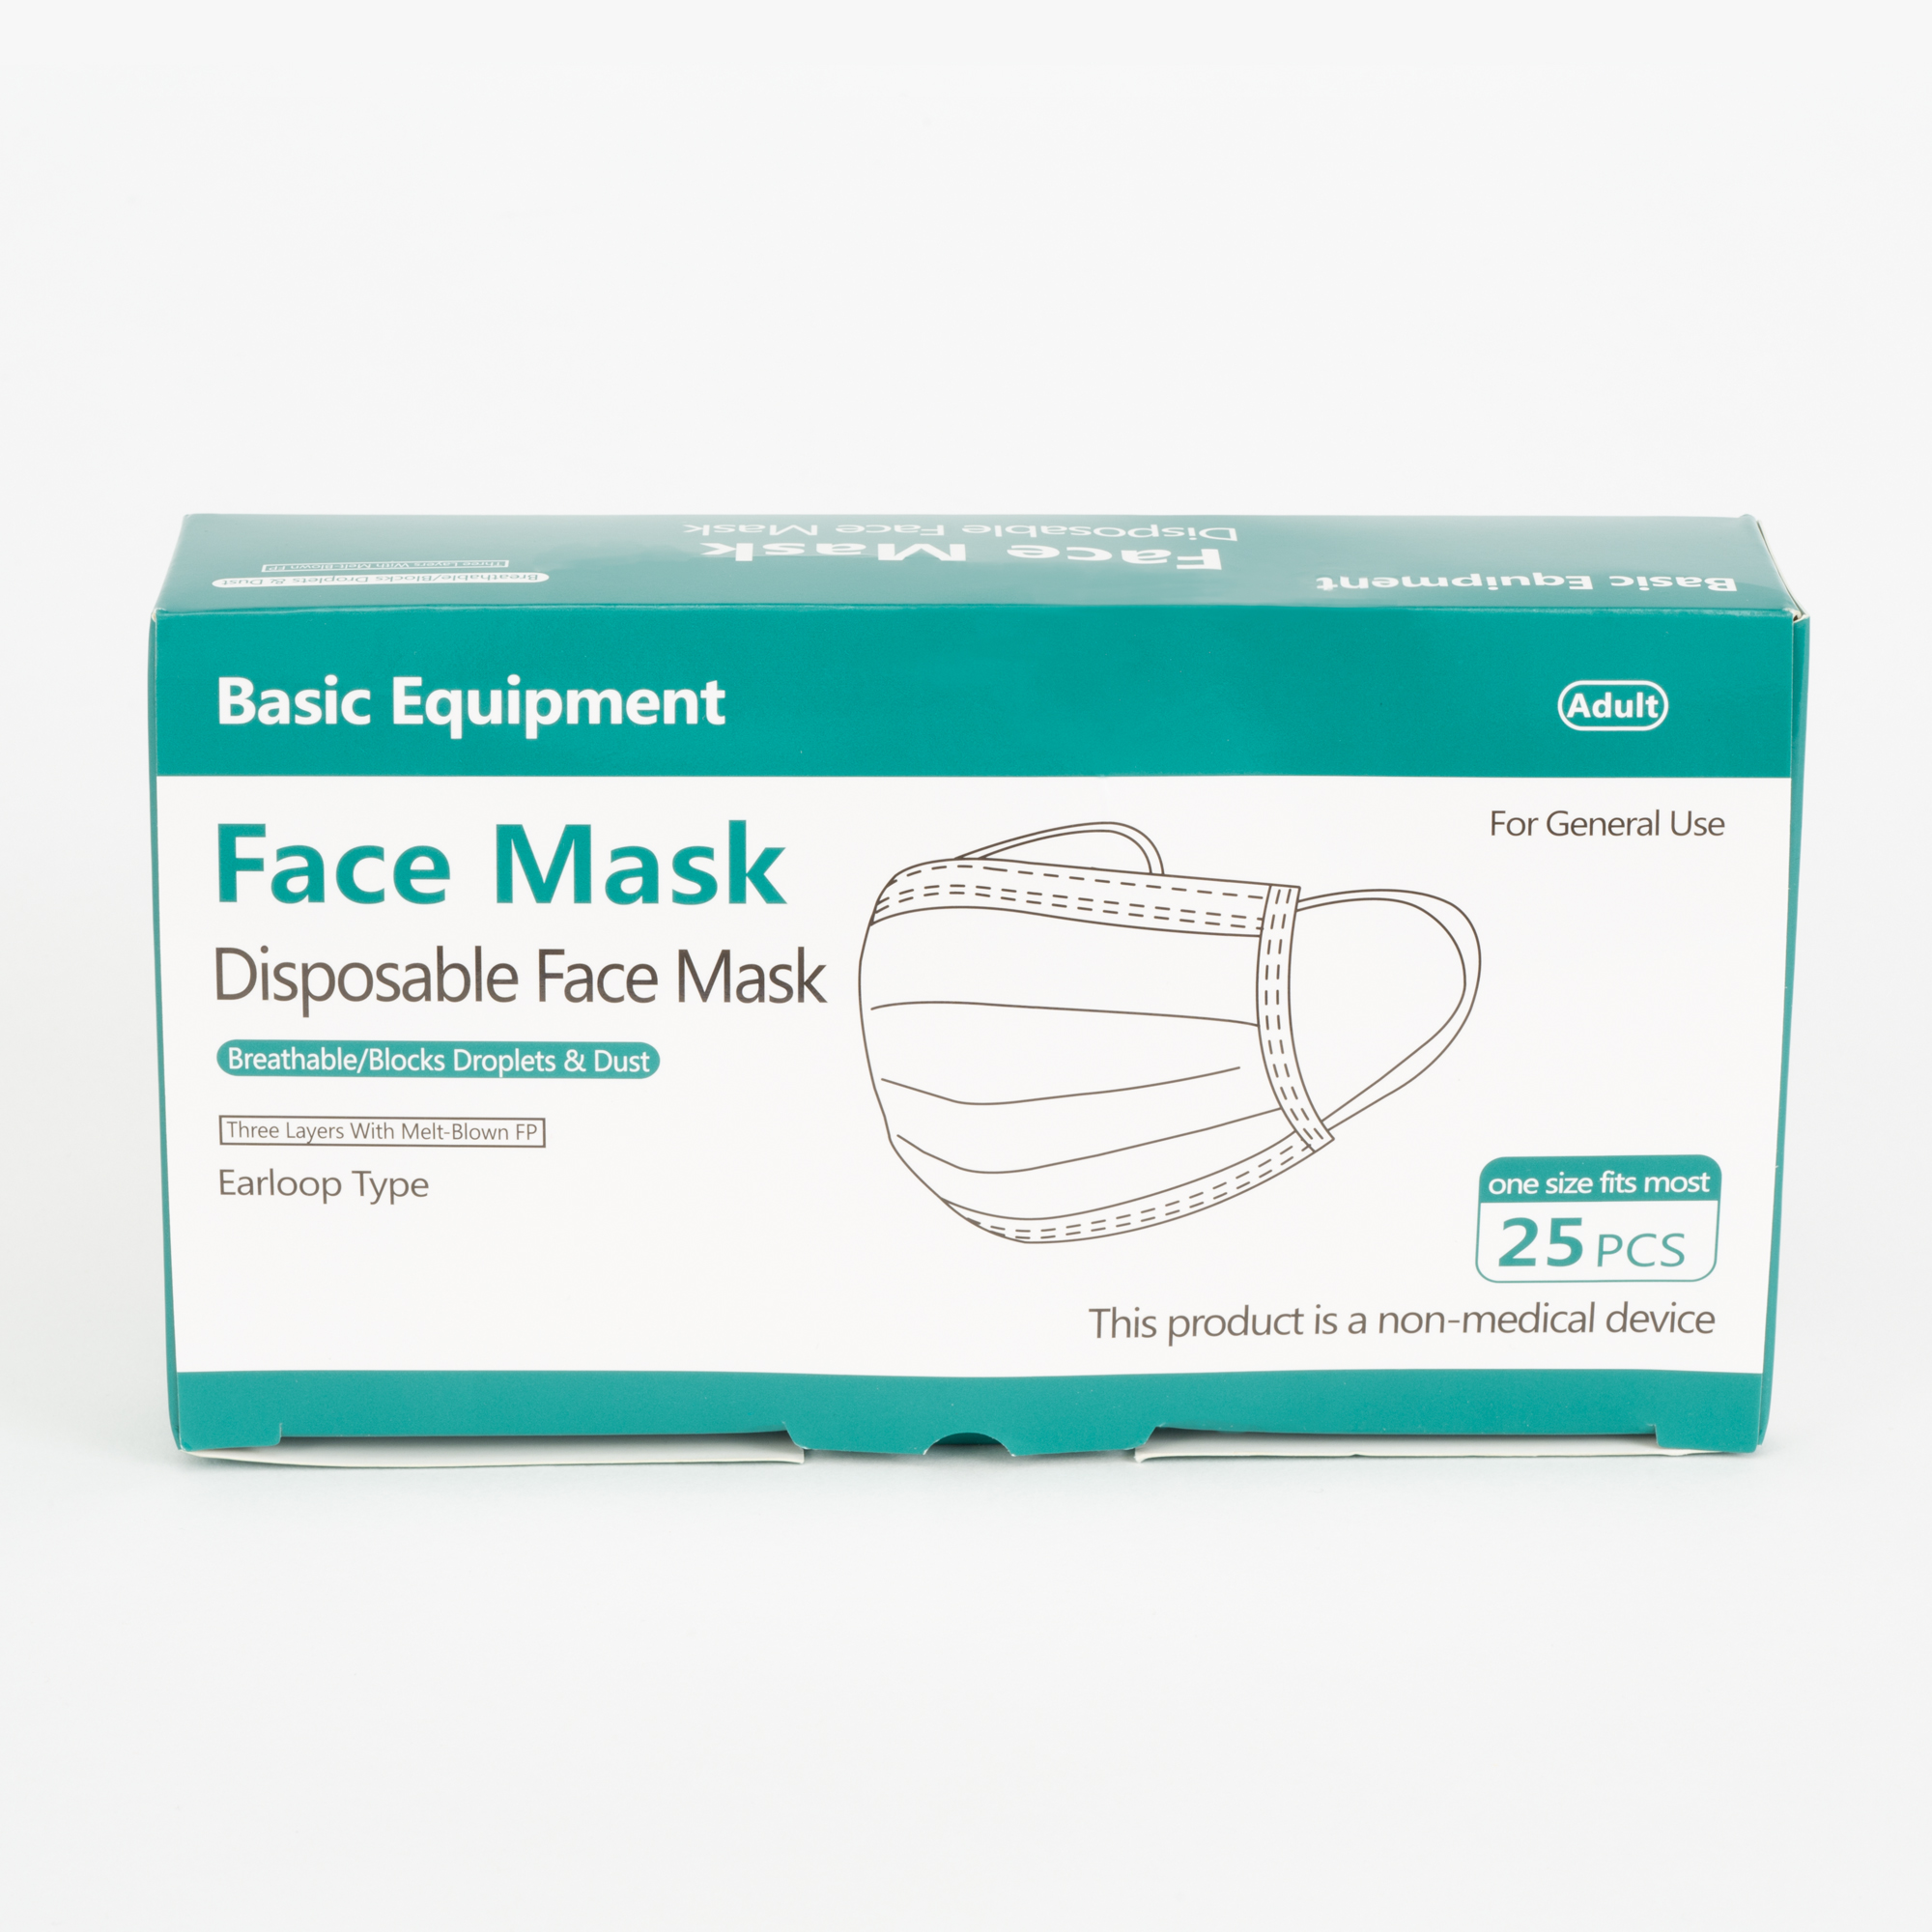 Basic Equipment Disposable Earloop Face Masks, 25 Count - image 1 of 7